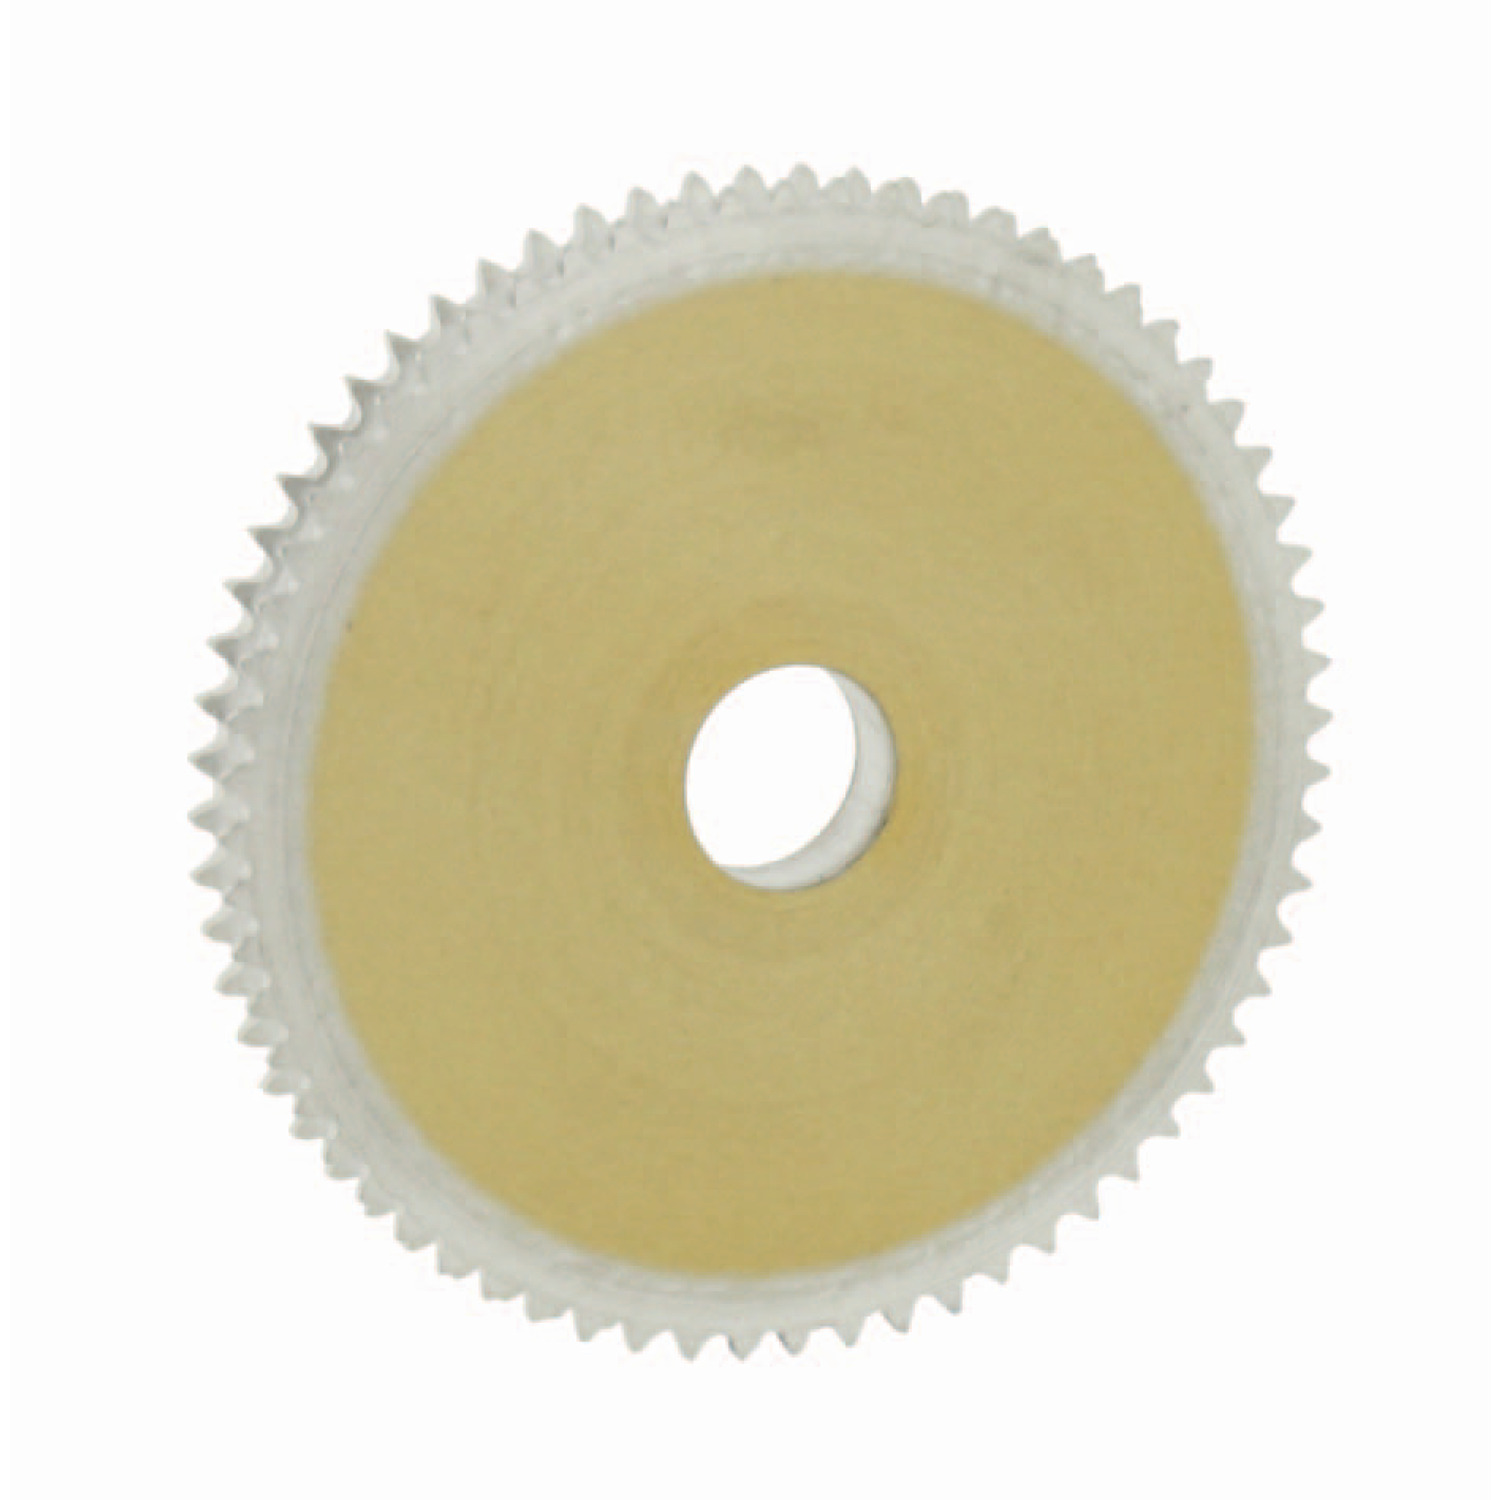 Product R1043, Hubless Double Sprockets 4mm nominal circular pitch / 